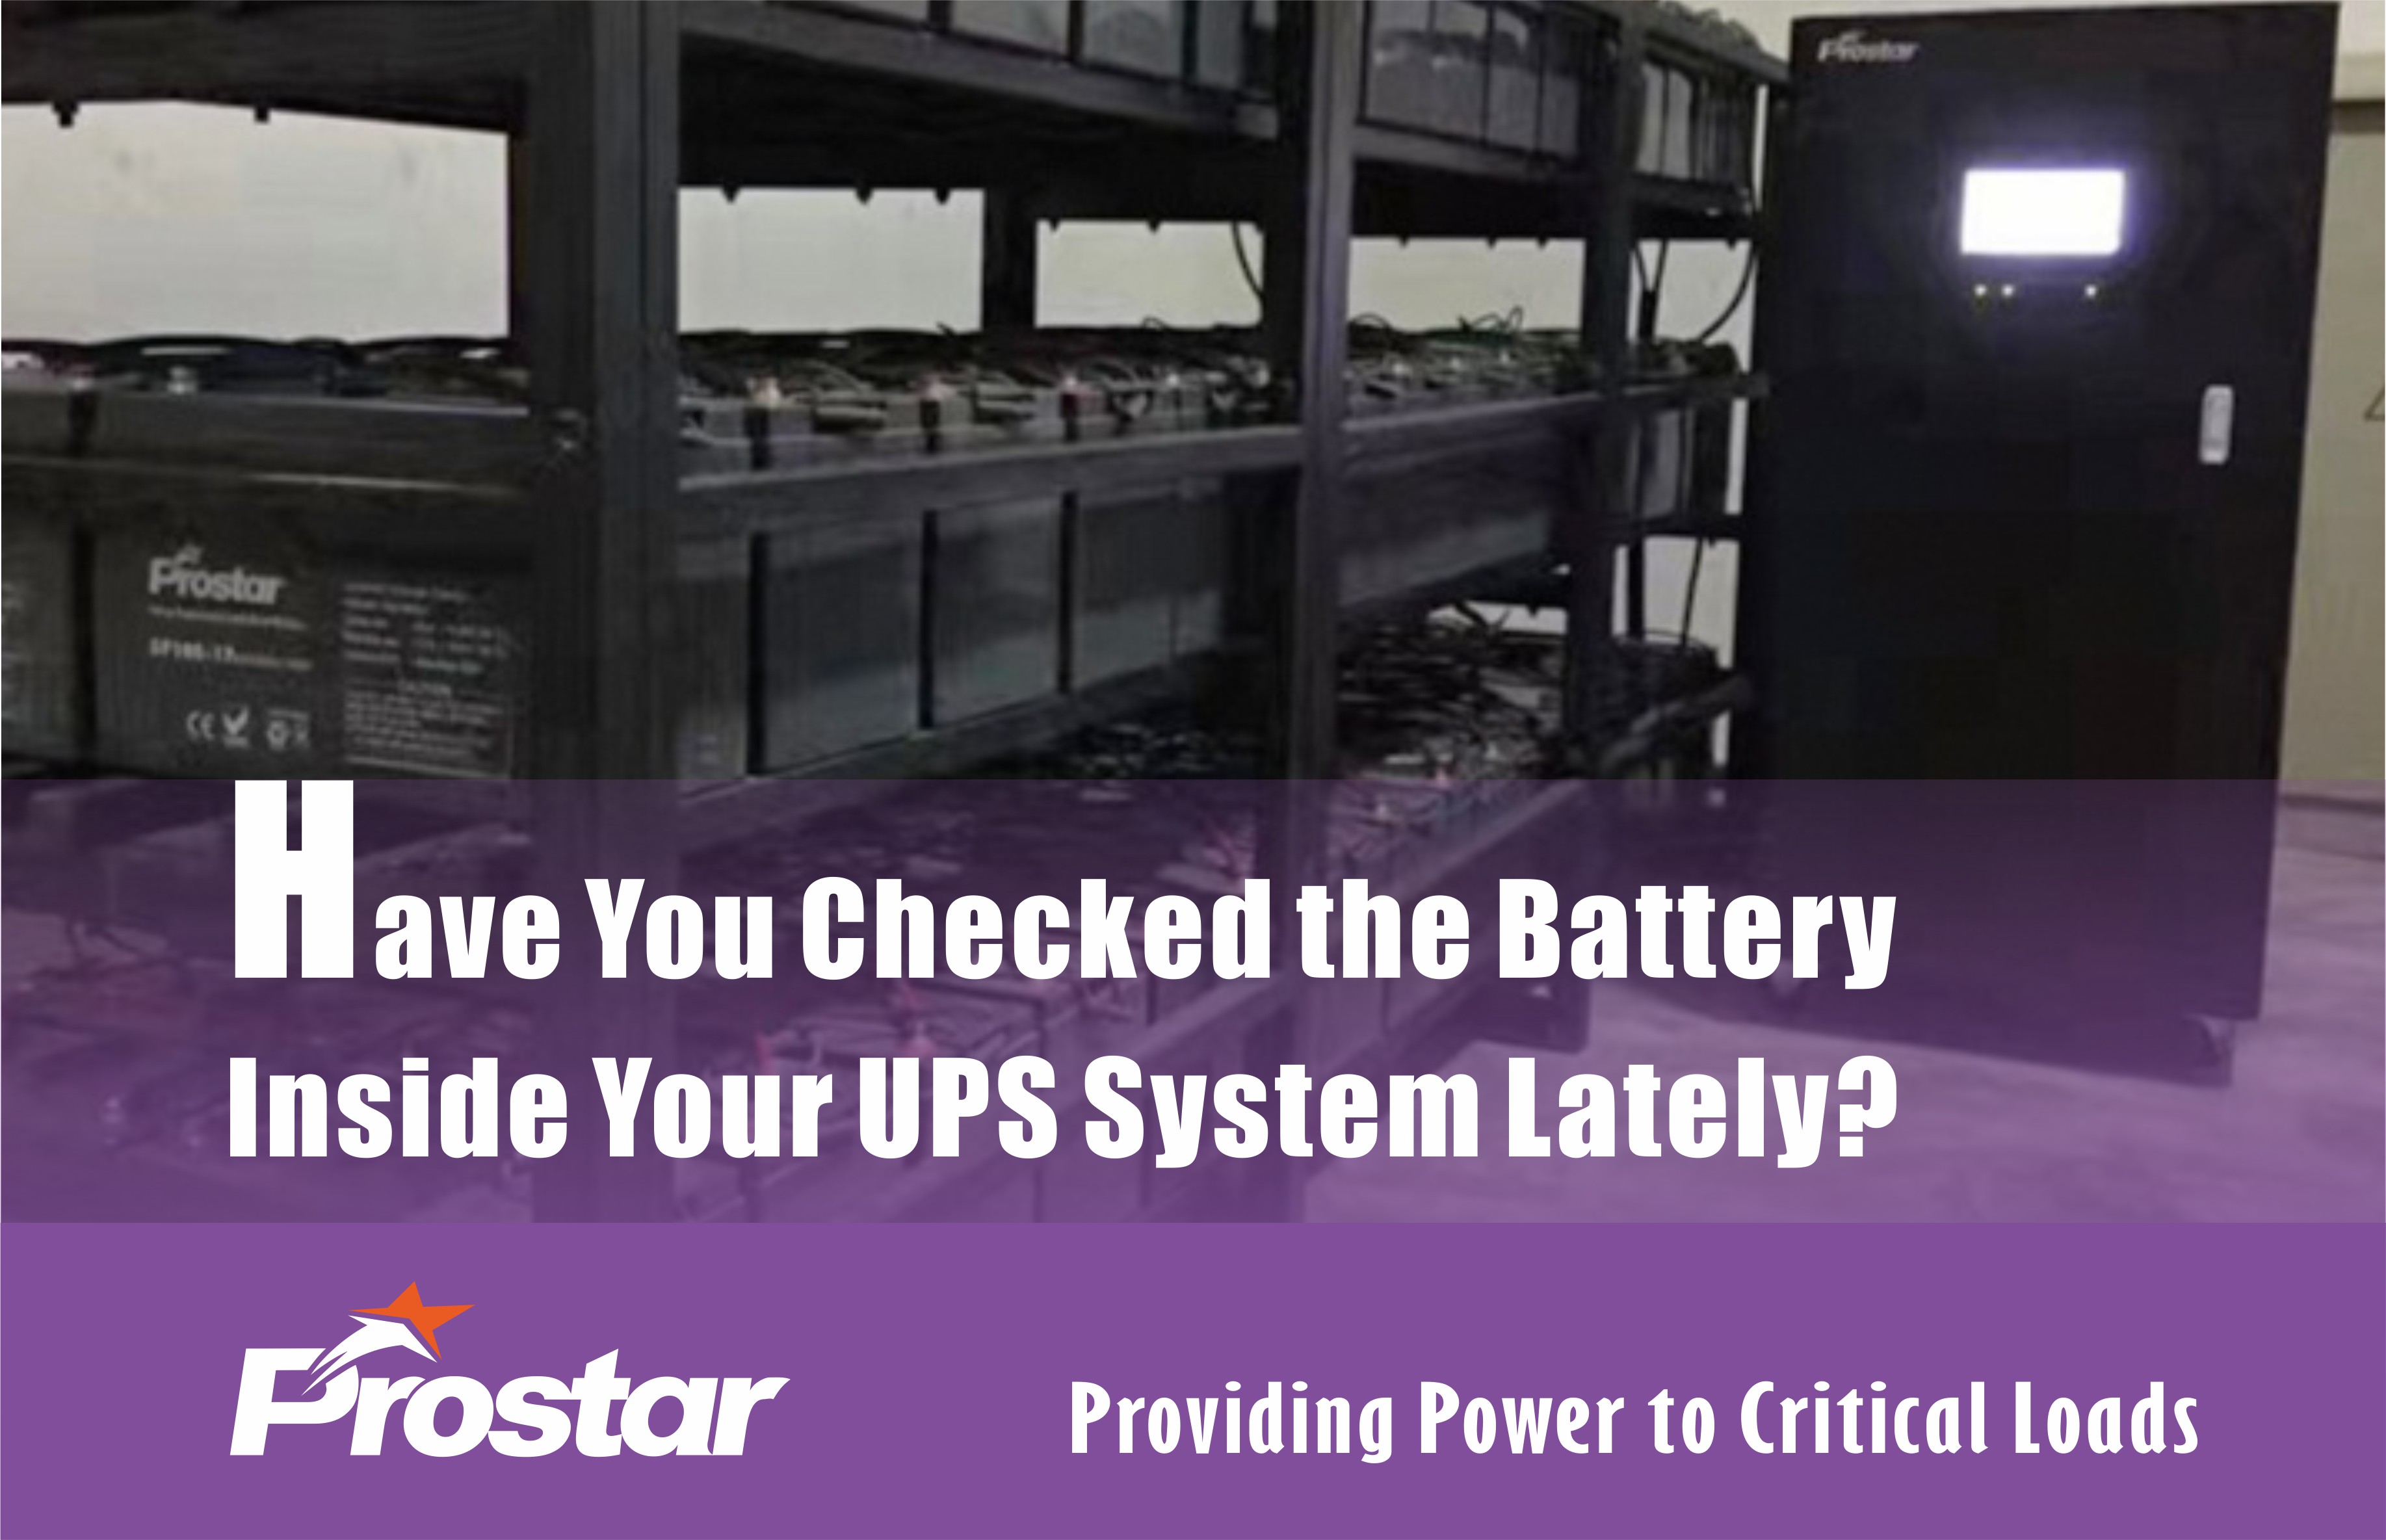 Have You Checked the Battery Inside Your UPS System Lately?